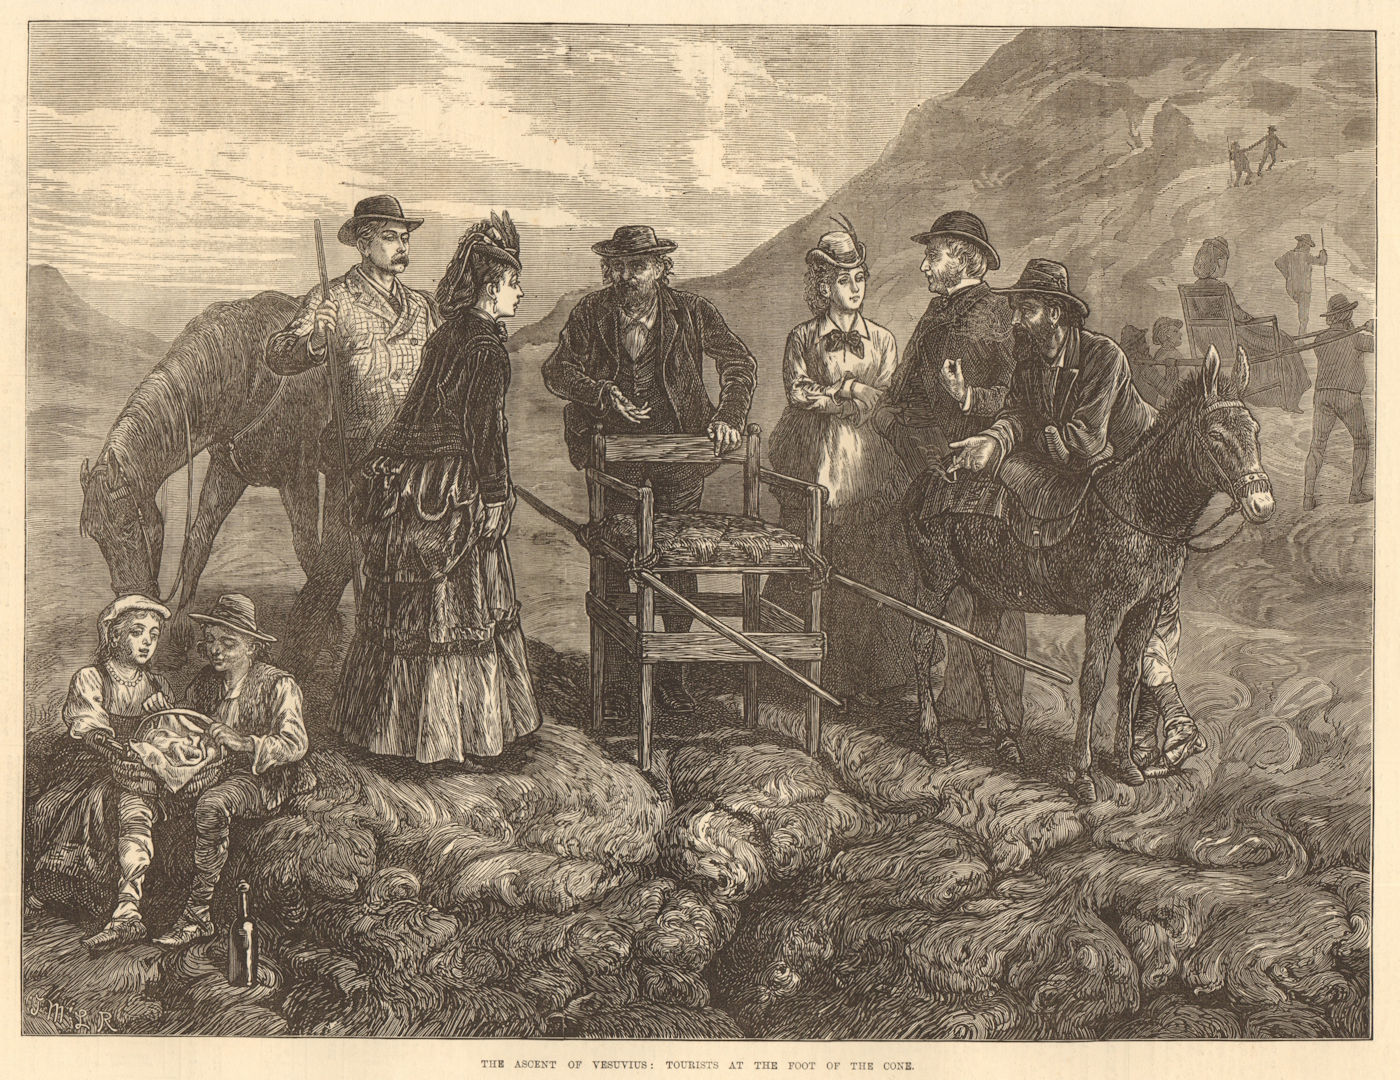 The ascent of Vesuvius: tourists at the foot of the cone. Italy. Volcanoes 1872